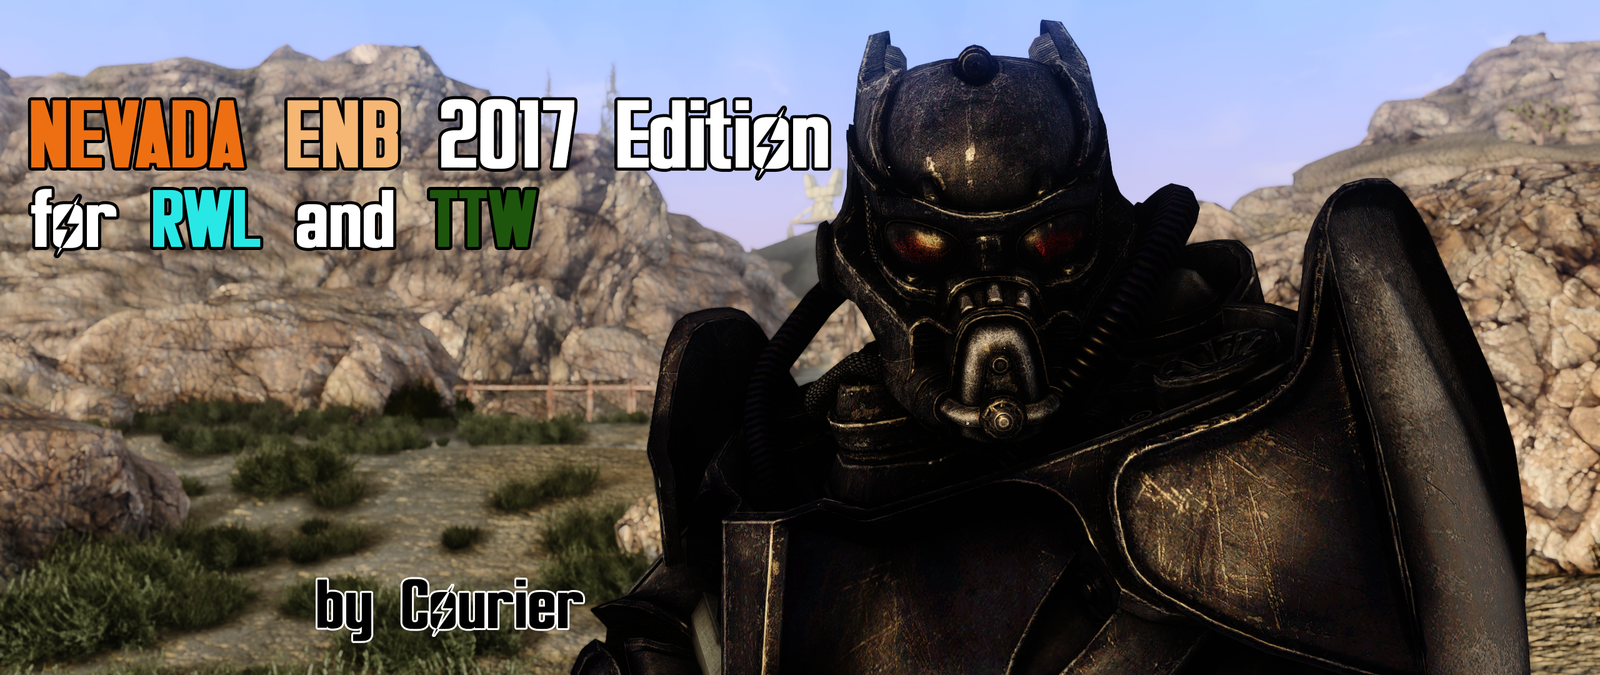 ENB Presets for Fallout NV worth a try - , Fallout, Fallout: New Vegas, Shaders, I do not like, Maud, Games, Computer games, Longpost, Fashion